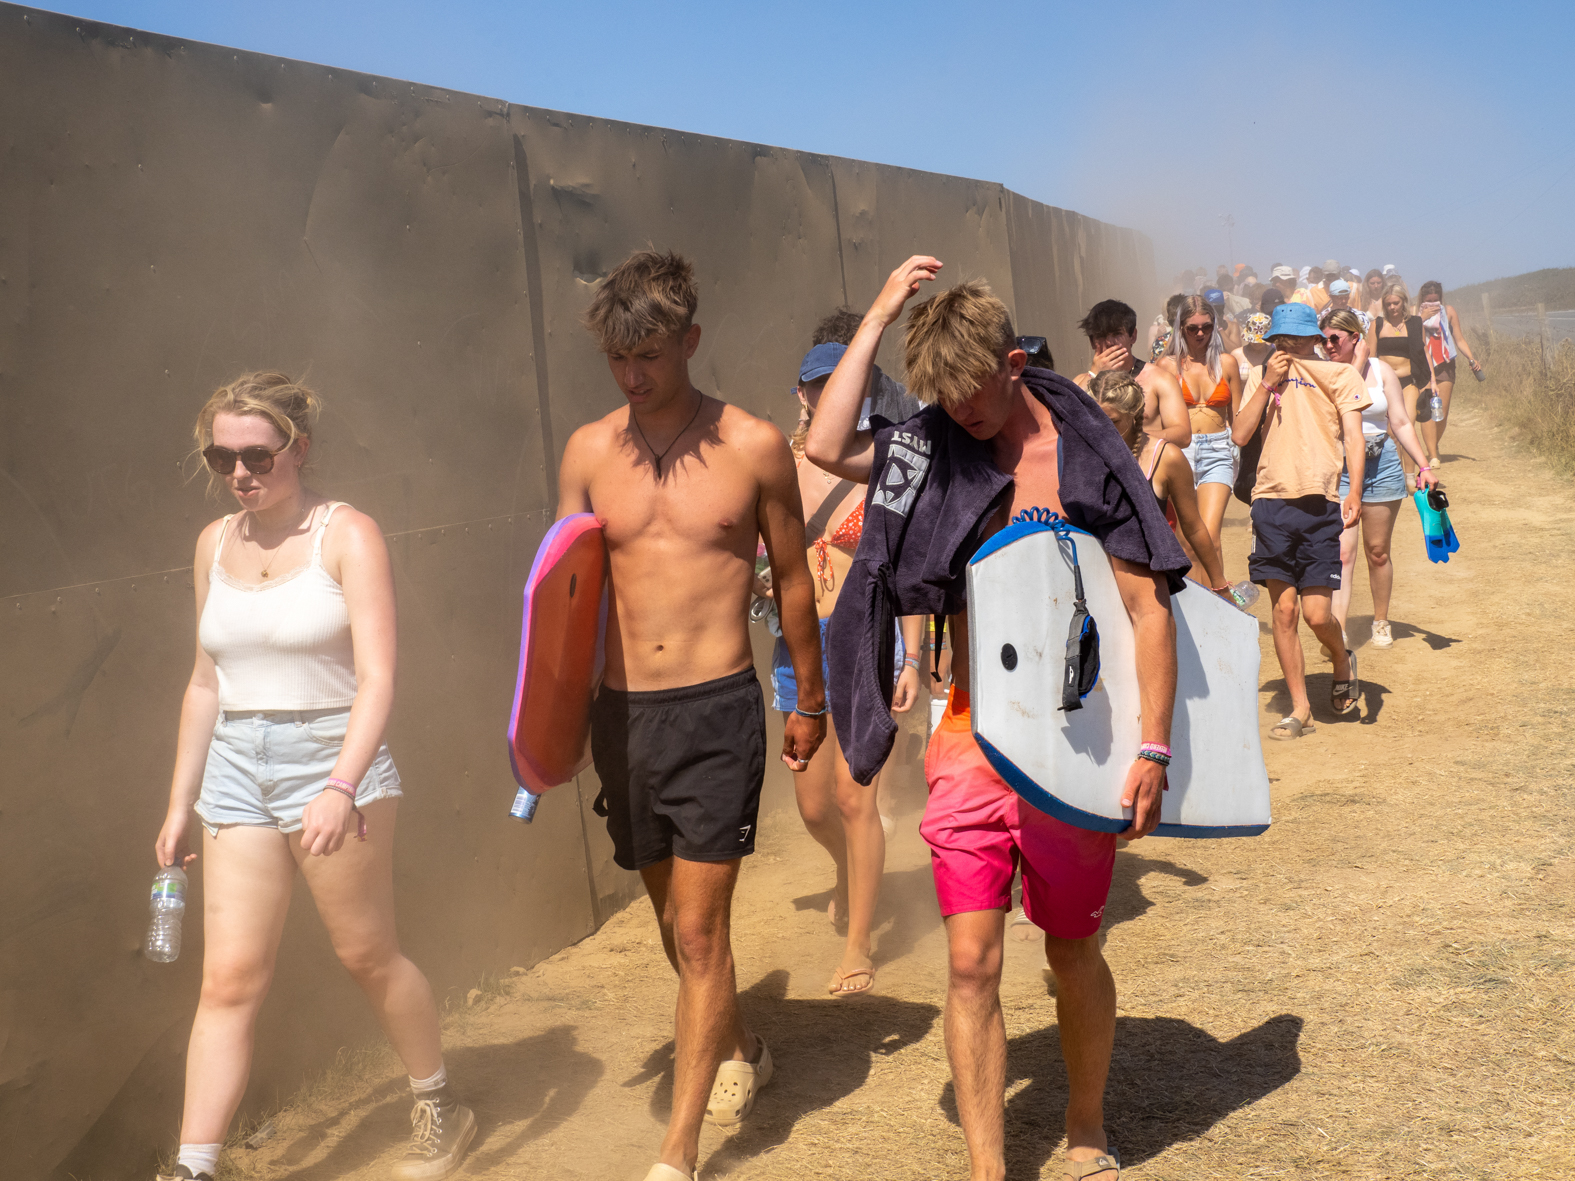 NEWQUAY, ENGLAND - AUGUST, 2022: Dust kicked up by viditors to Watergate Bay and Boardmasters Festival. During a heatwave in England, thousands of visitors headed to the town of Newquay, Cornwall for the surfing, beaches and Boardmasters Festival. Resources during the summer are stretched and some local residents are being pushed out of the area by tourists and due to an influx of holiday homes.